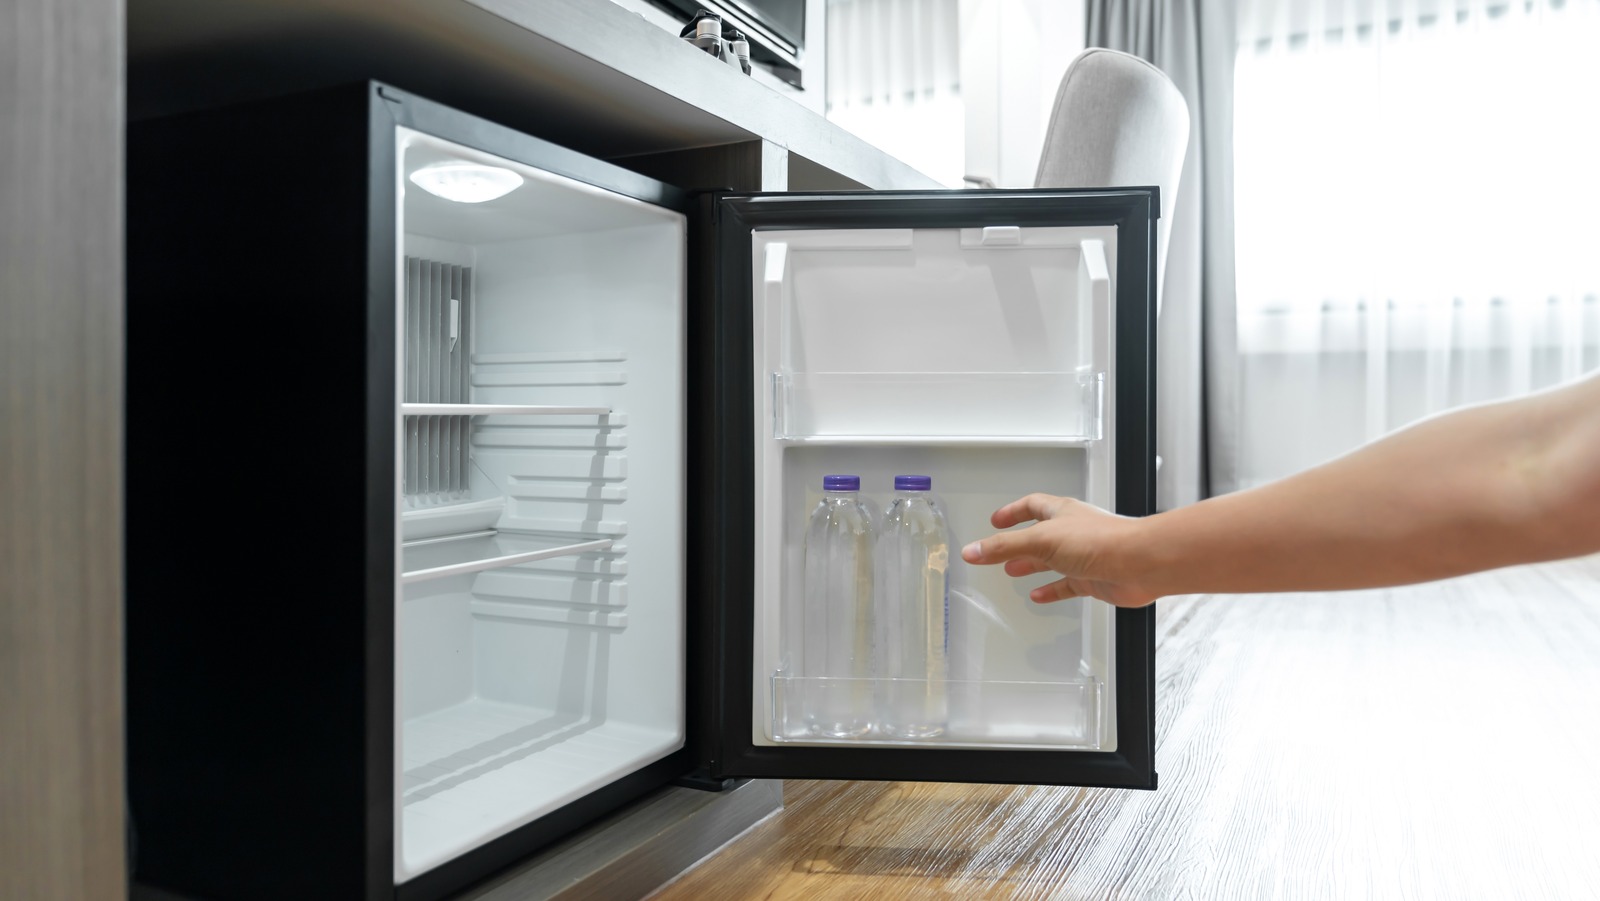 Differences between Small Fridge and Minibar